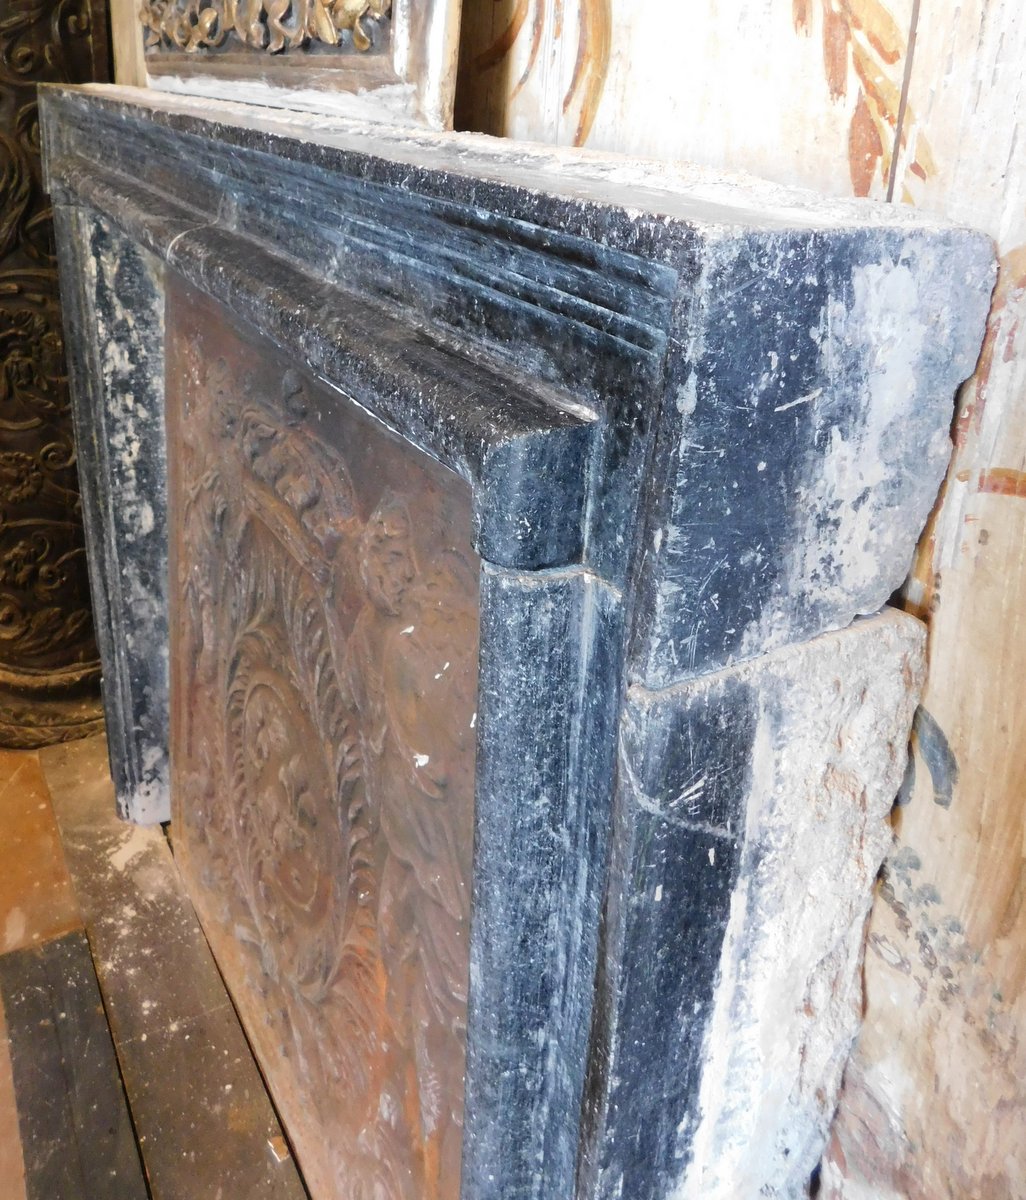 chm792 - fireplace in Serpentine marble, 18th century, meas. cm W 138 x H 118